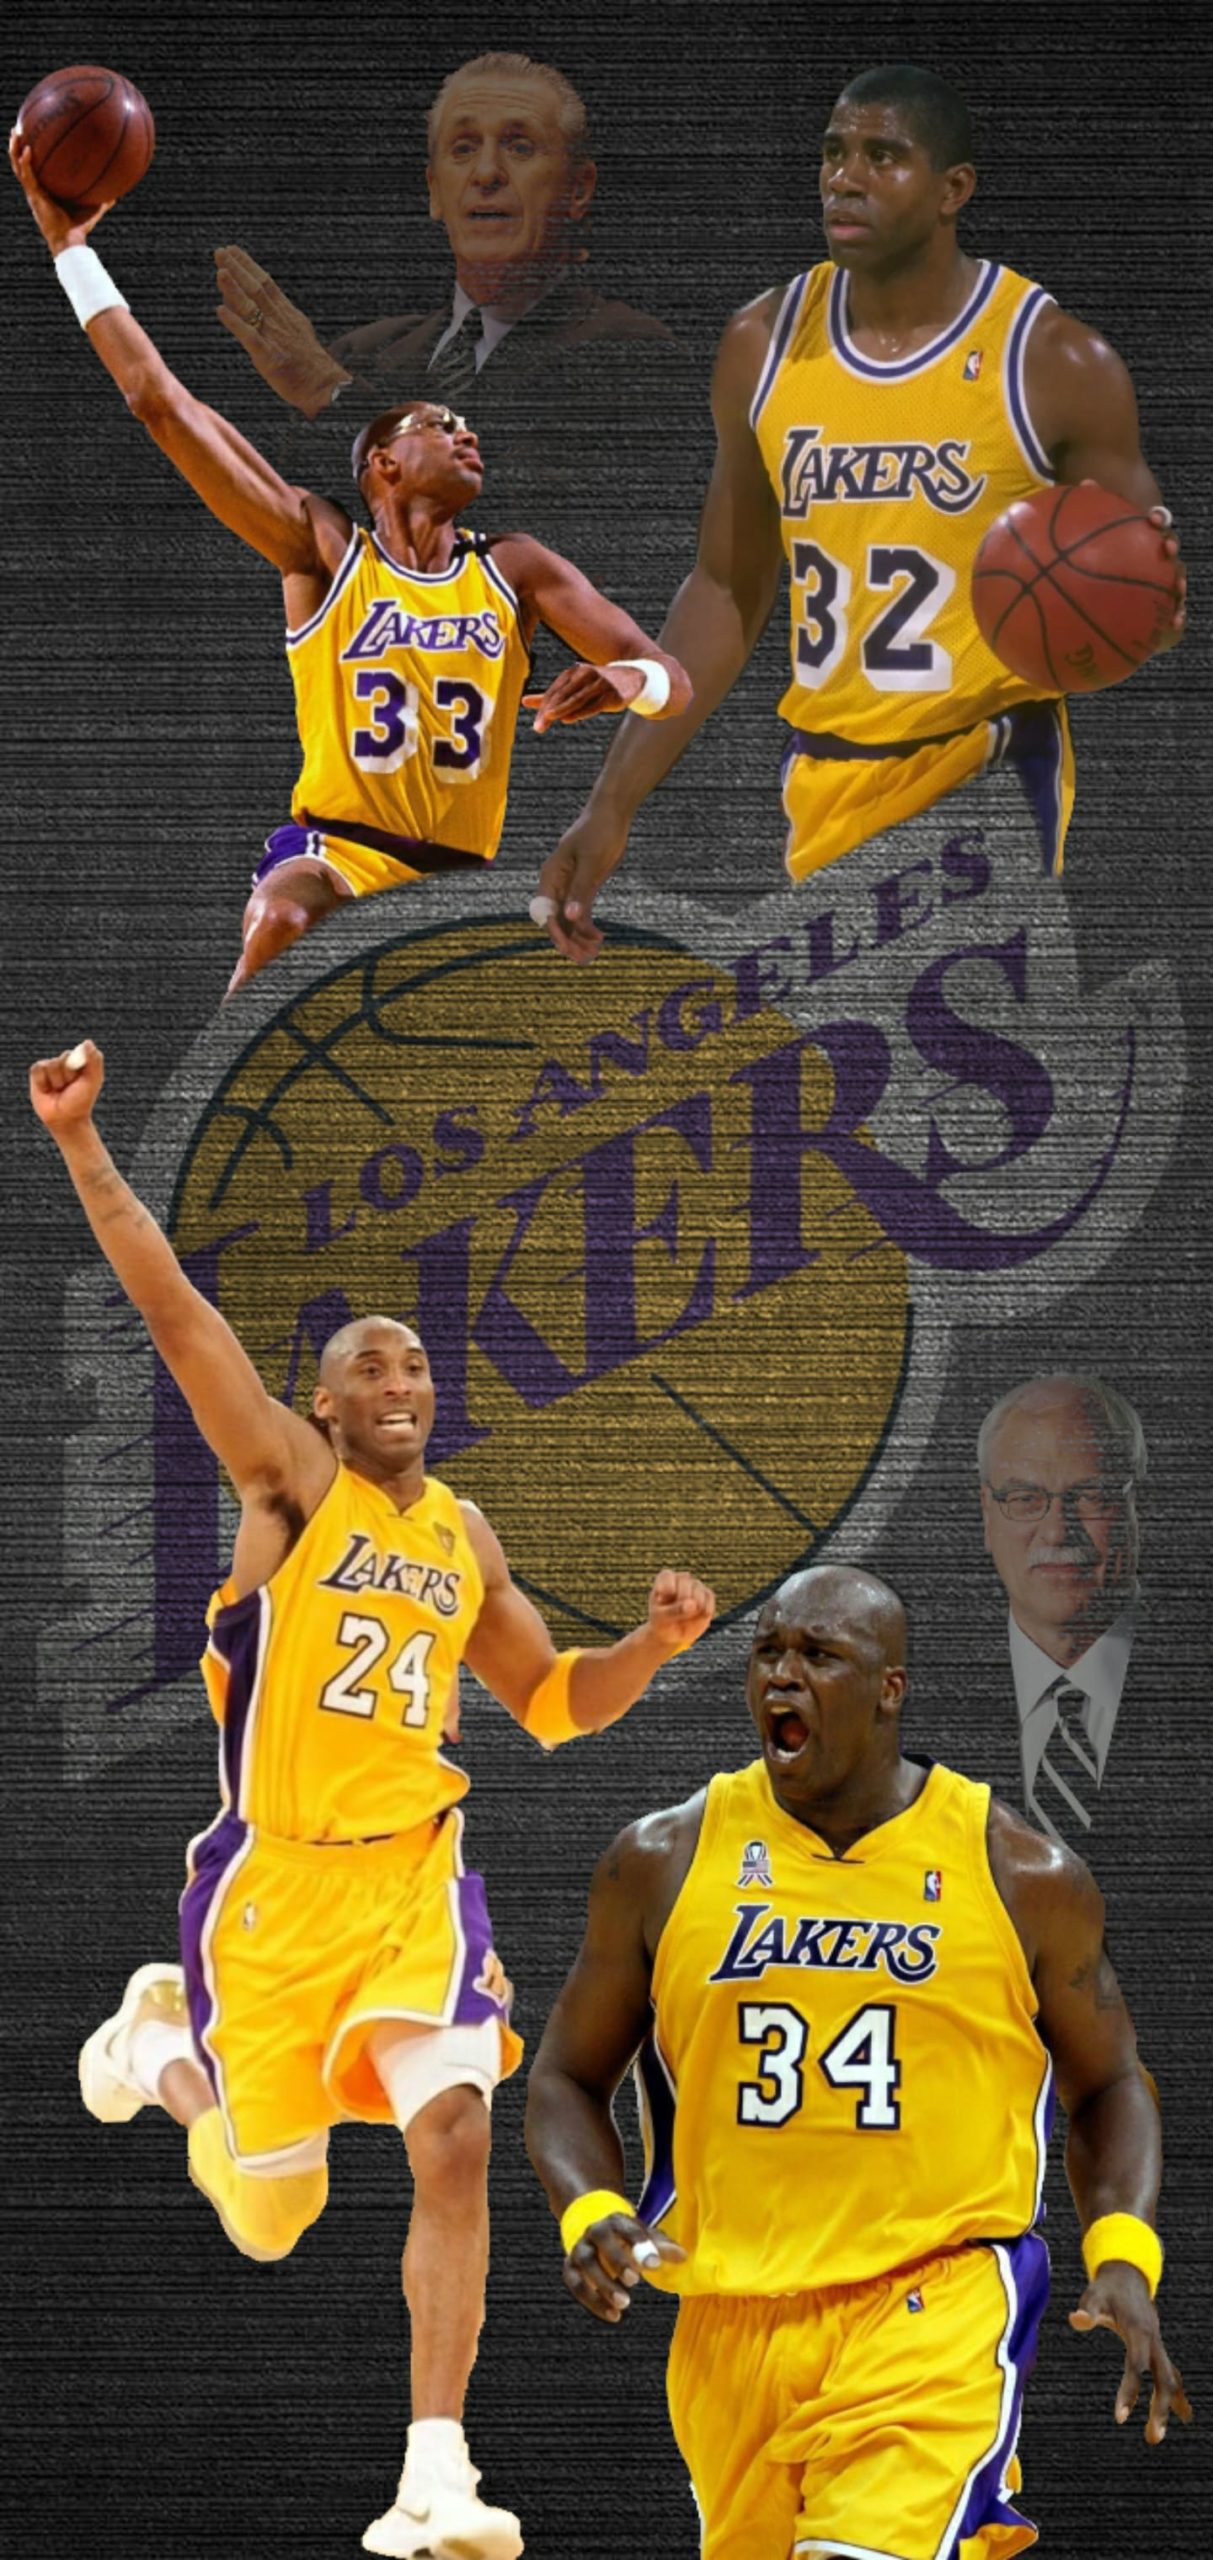 Los Angeles Lakers Wallpaper NBA Lakers Background [ 2021 ]